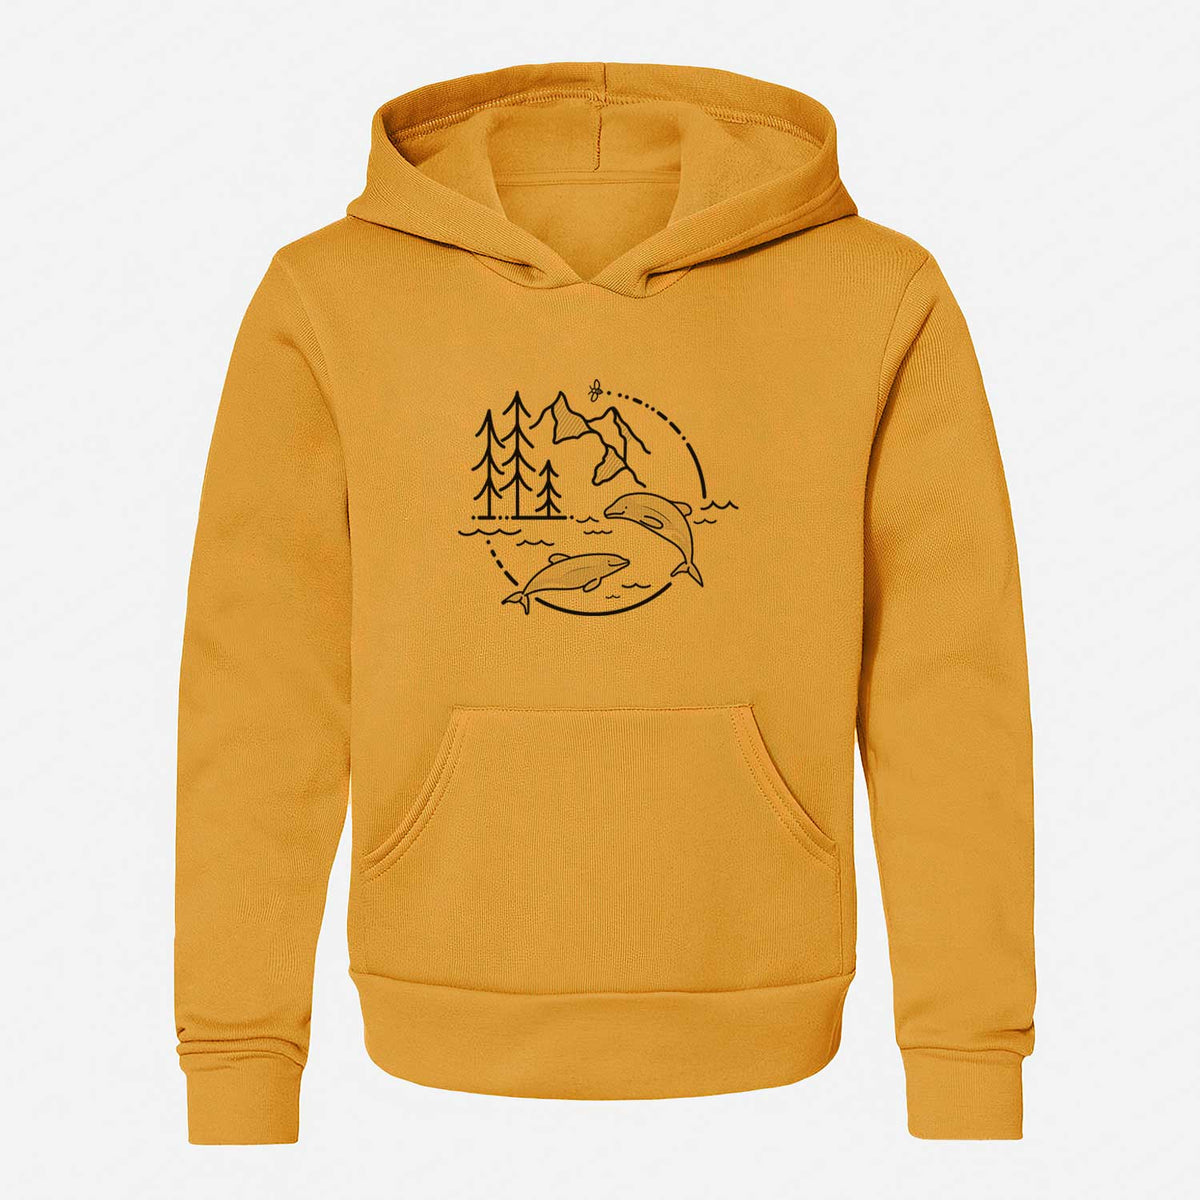 It&#39;s All Connected - Maui Dolphins - Youth Hoodie Sweatshirt